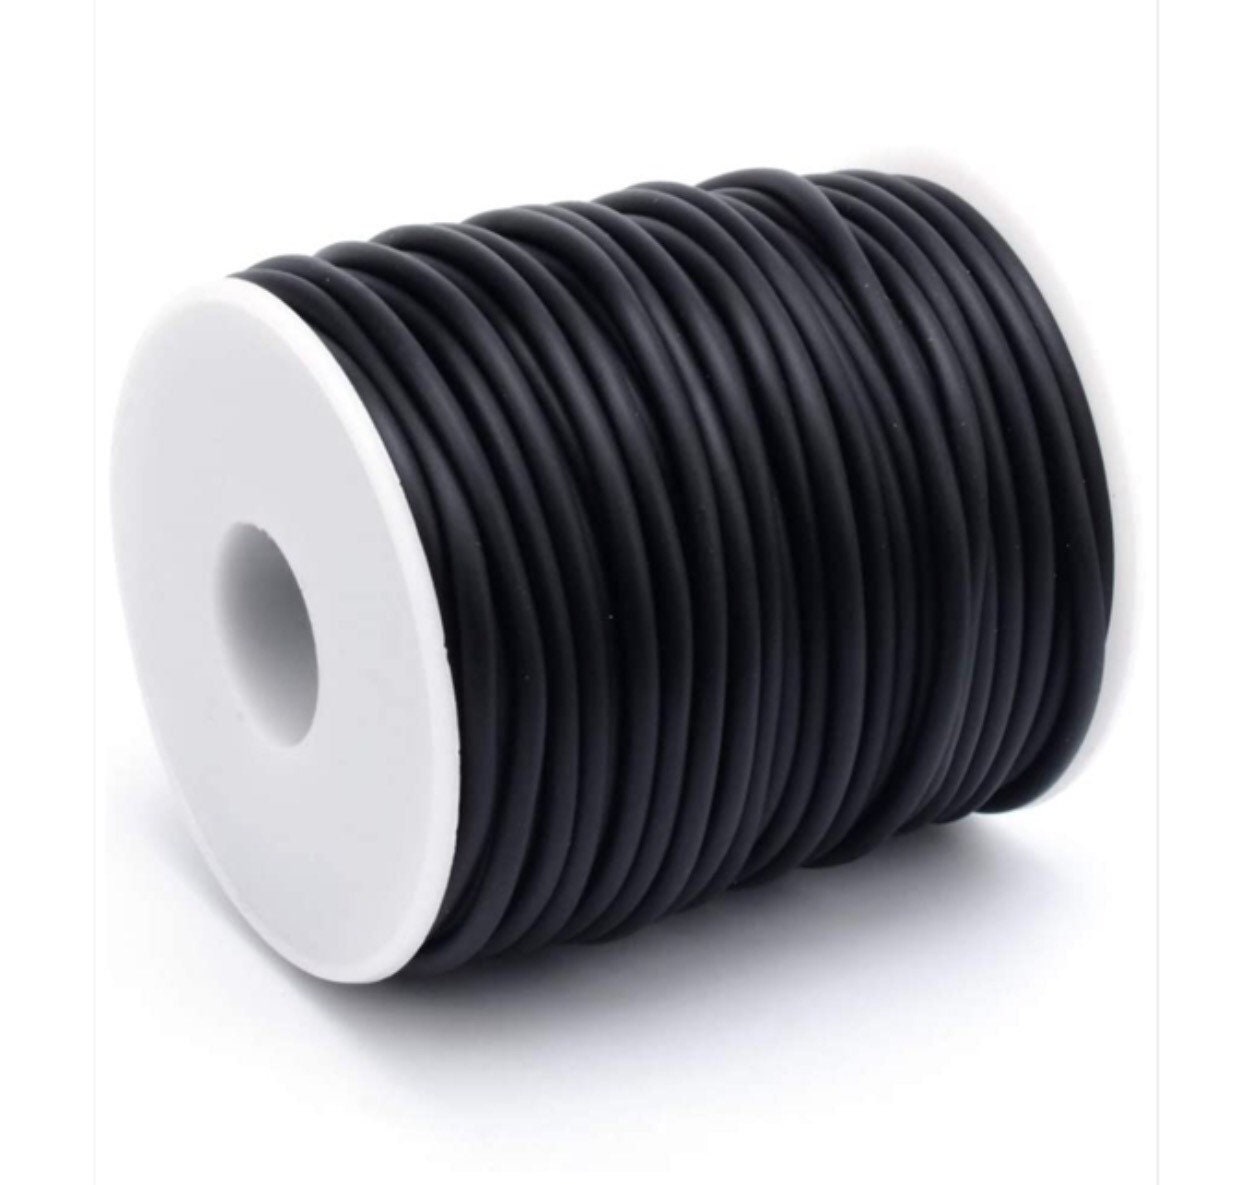 Elastic Cord: Black Solid Elastic Cord, approx. 2mm x 25ft / DIY Cord,  Stretch Cord, Fabric Elastic, Beading / Craft and Jewelry Supplies